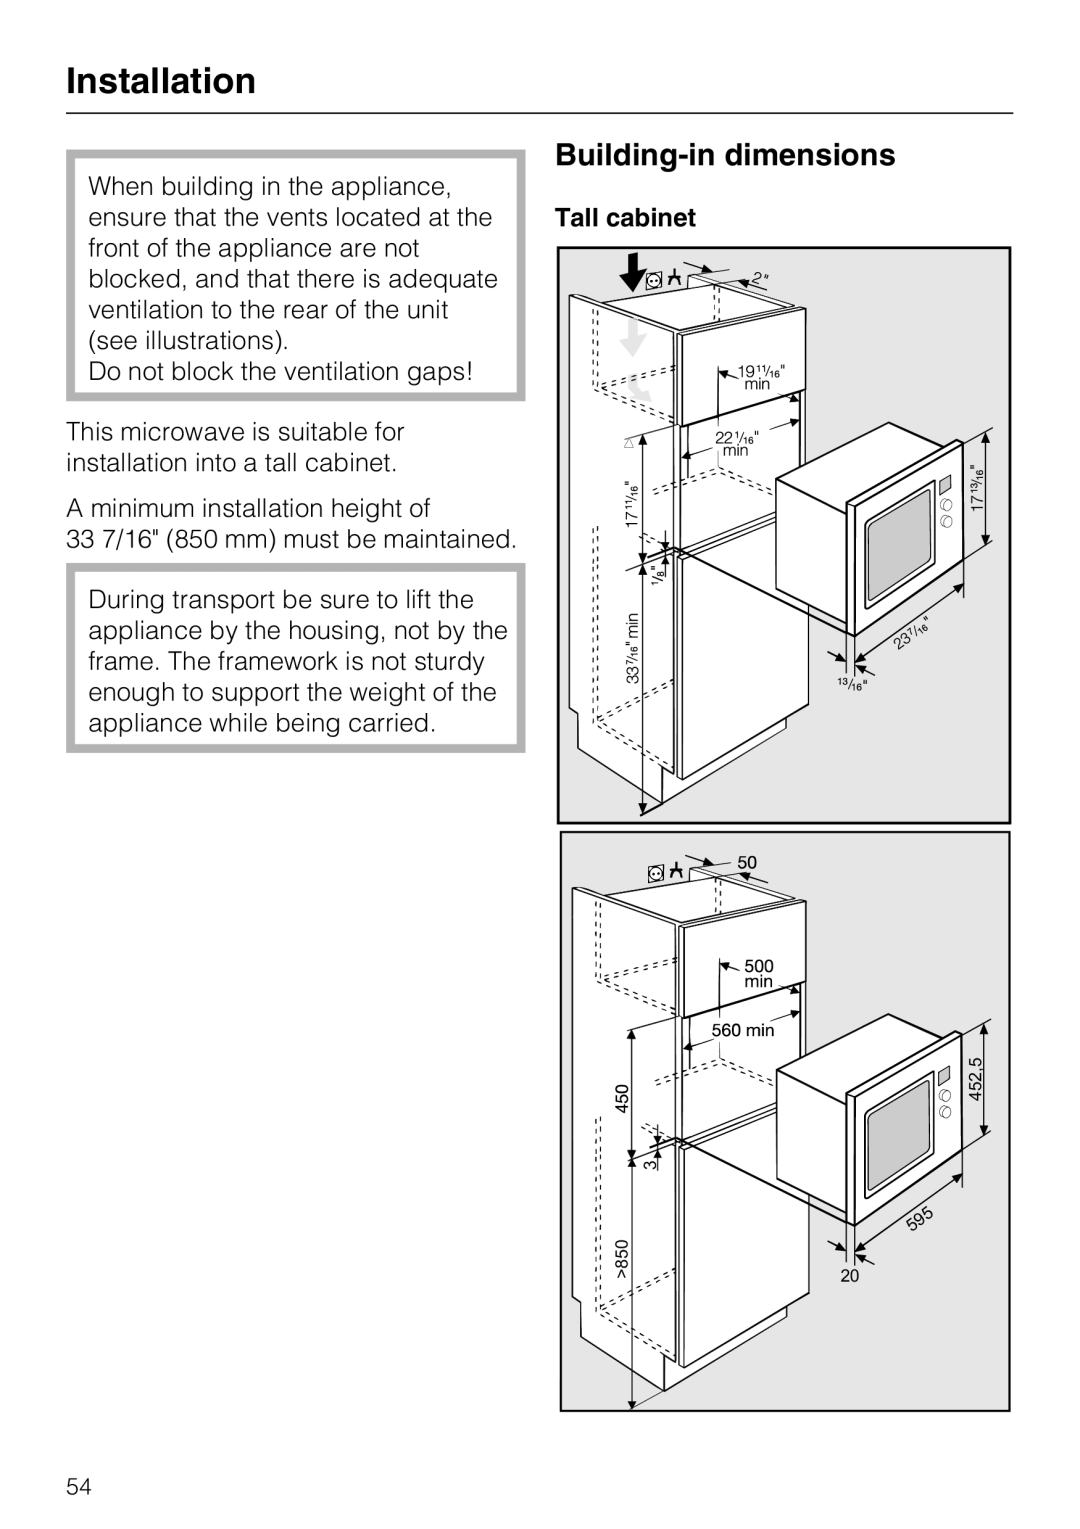 Miele 09 798 350 installation instructions Installation, Building-indimensions, Tall cabinet 